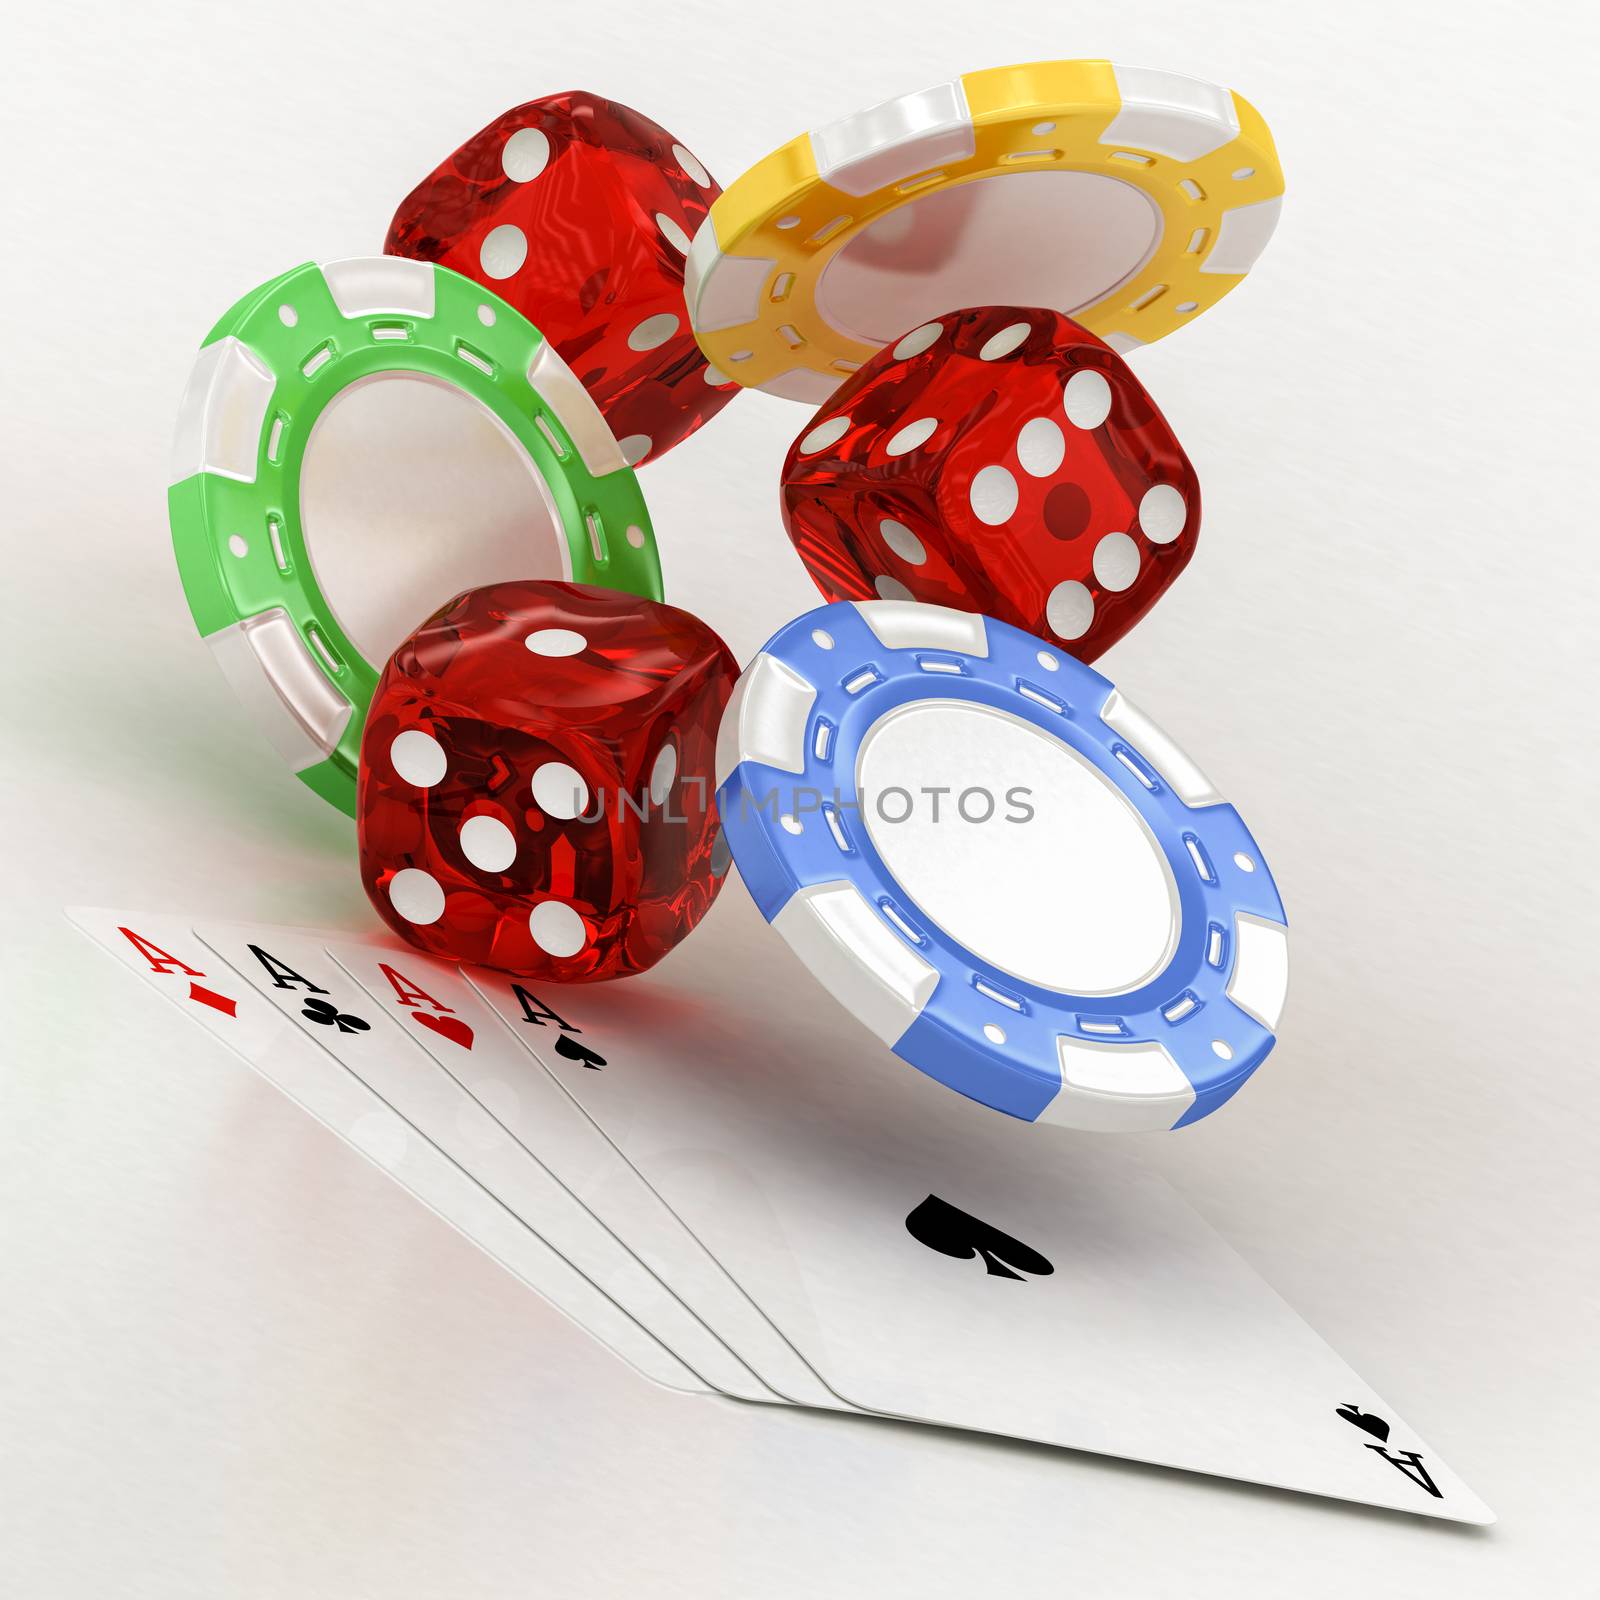 dice, chips and cards by Lupen